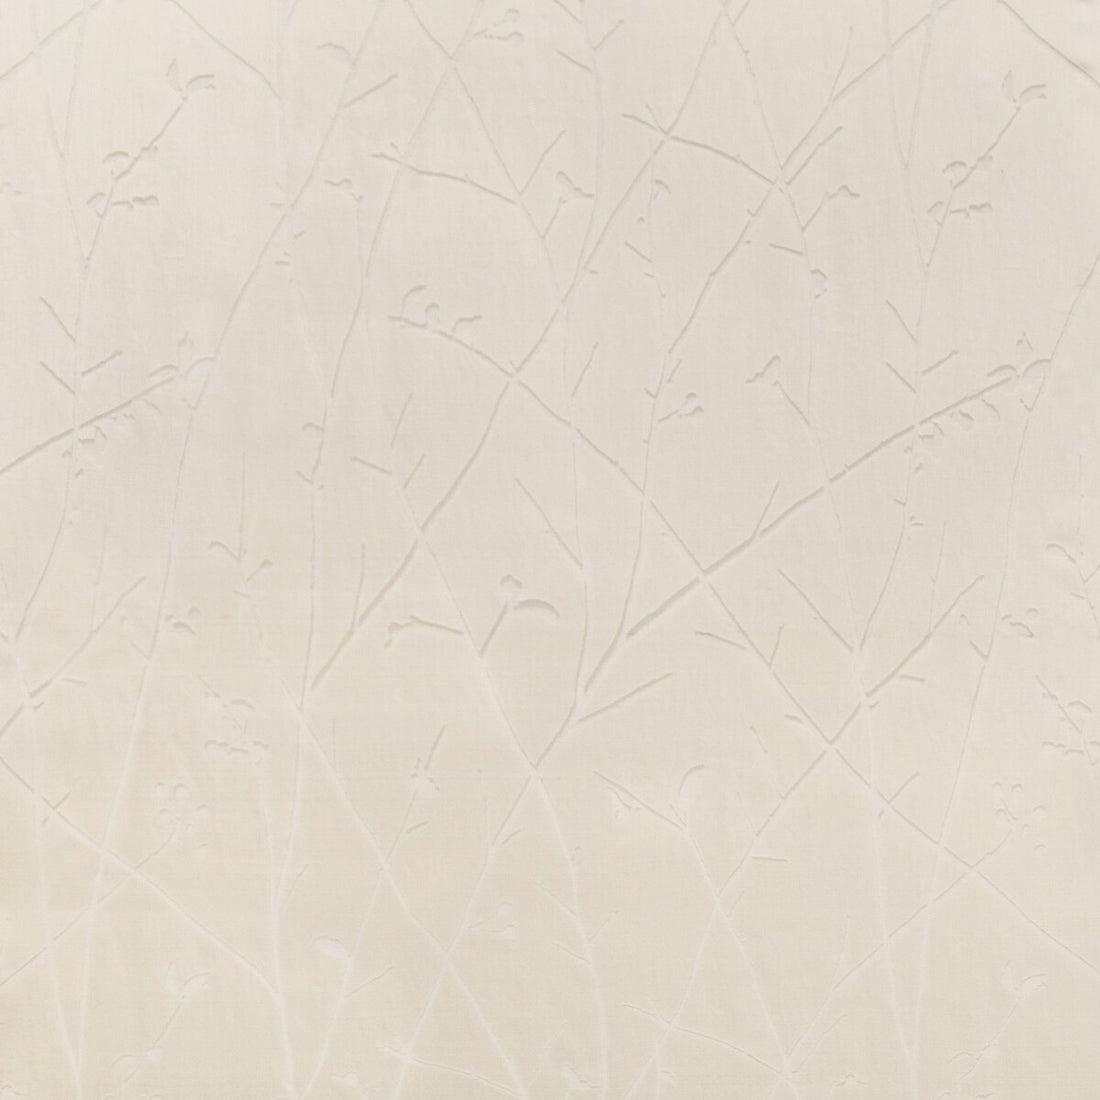 Ramus fabric in ivory color - pattern 4463.1.0 - by Kravet Couture in the Sue Firestone Malibu collection